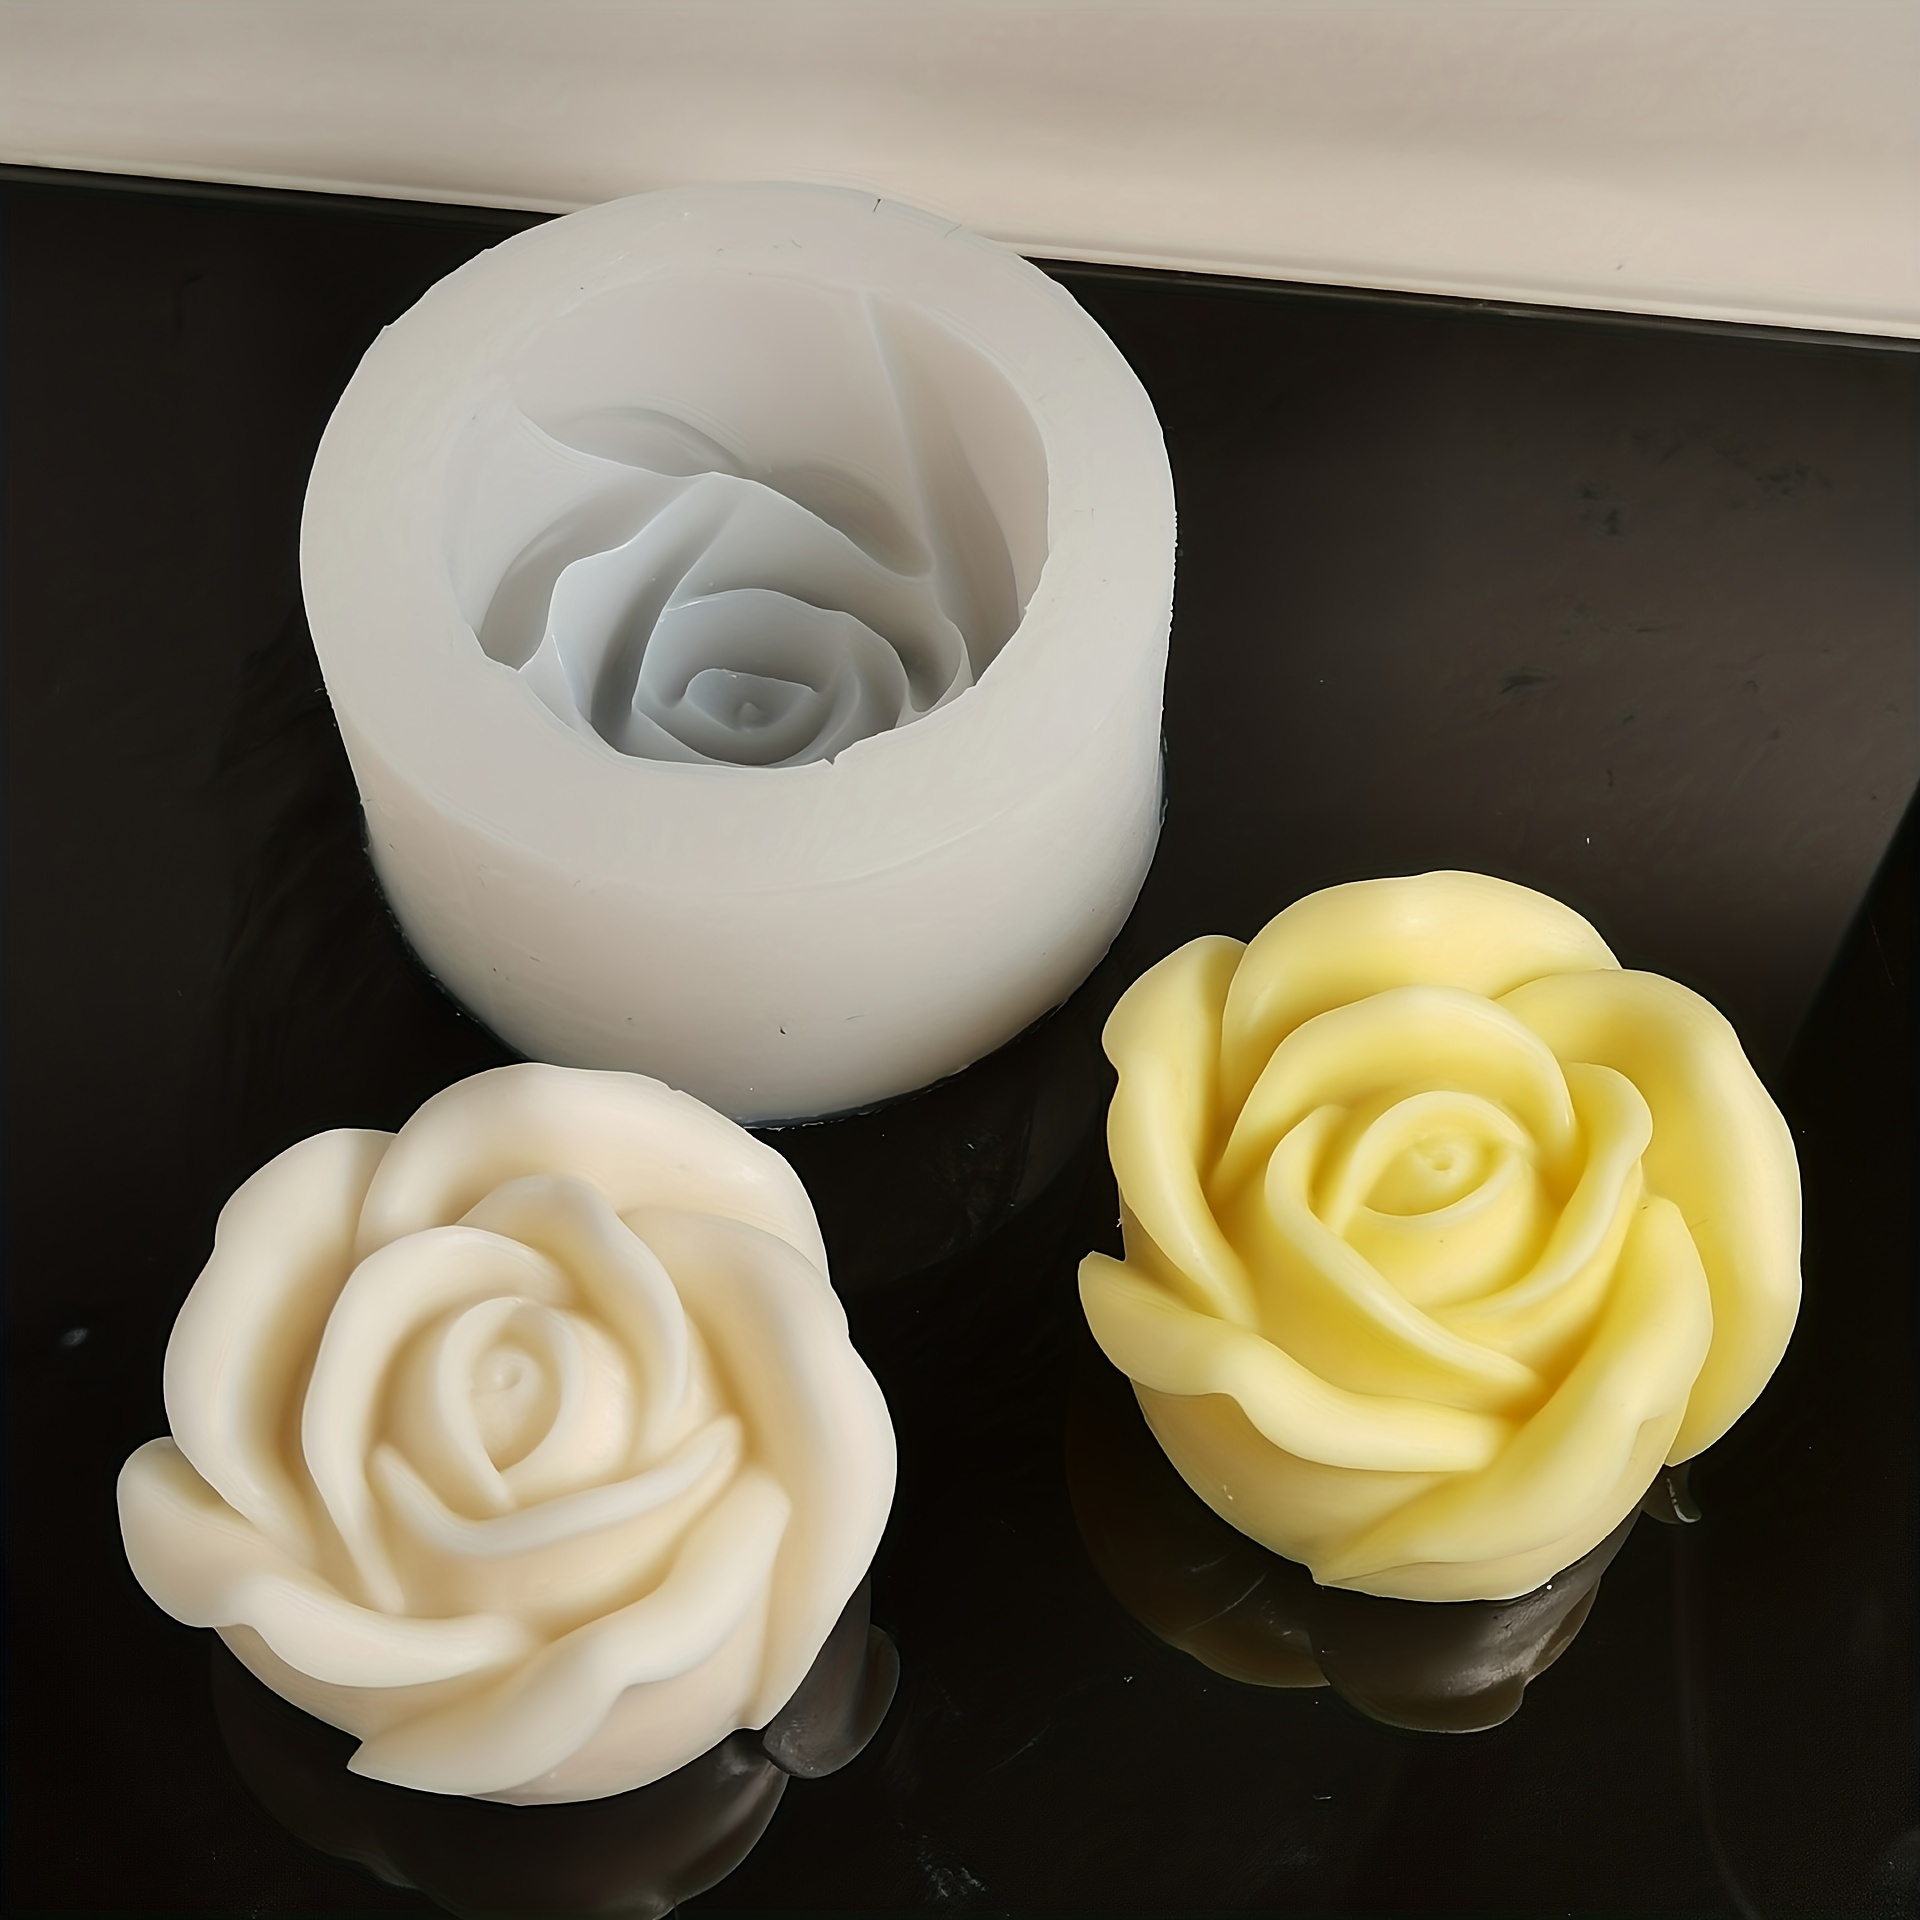 

fantasy Floral" Elegant Rose Silicone Mold For Candles, Soaps, And Baking - Aromatherapy Gypsum Car Decor